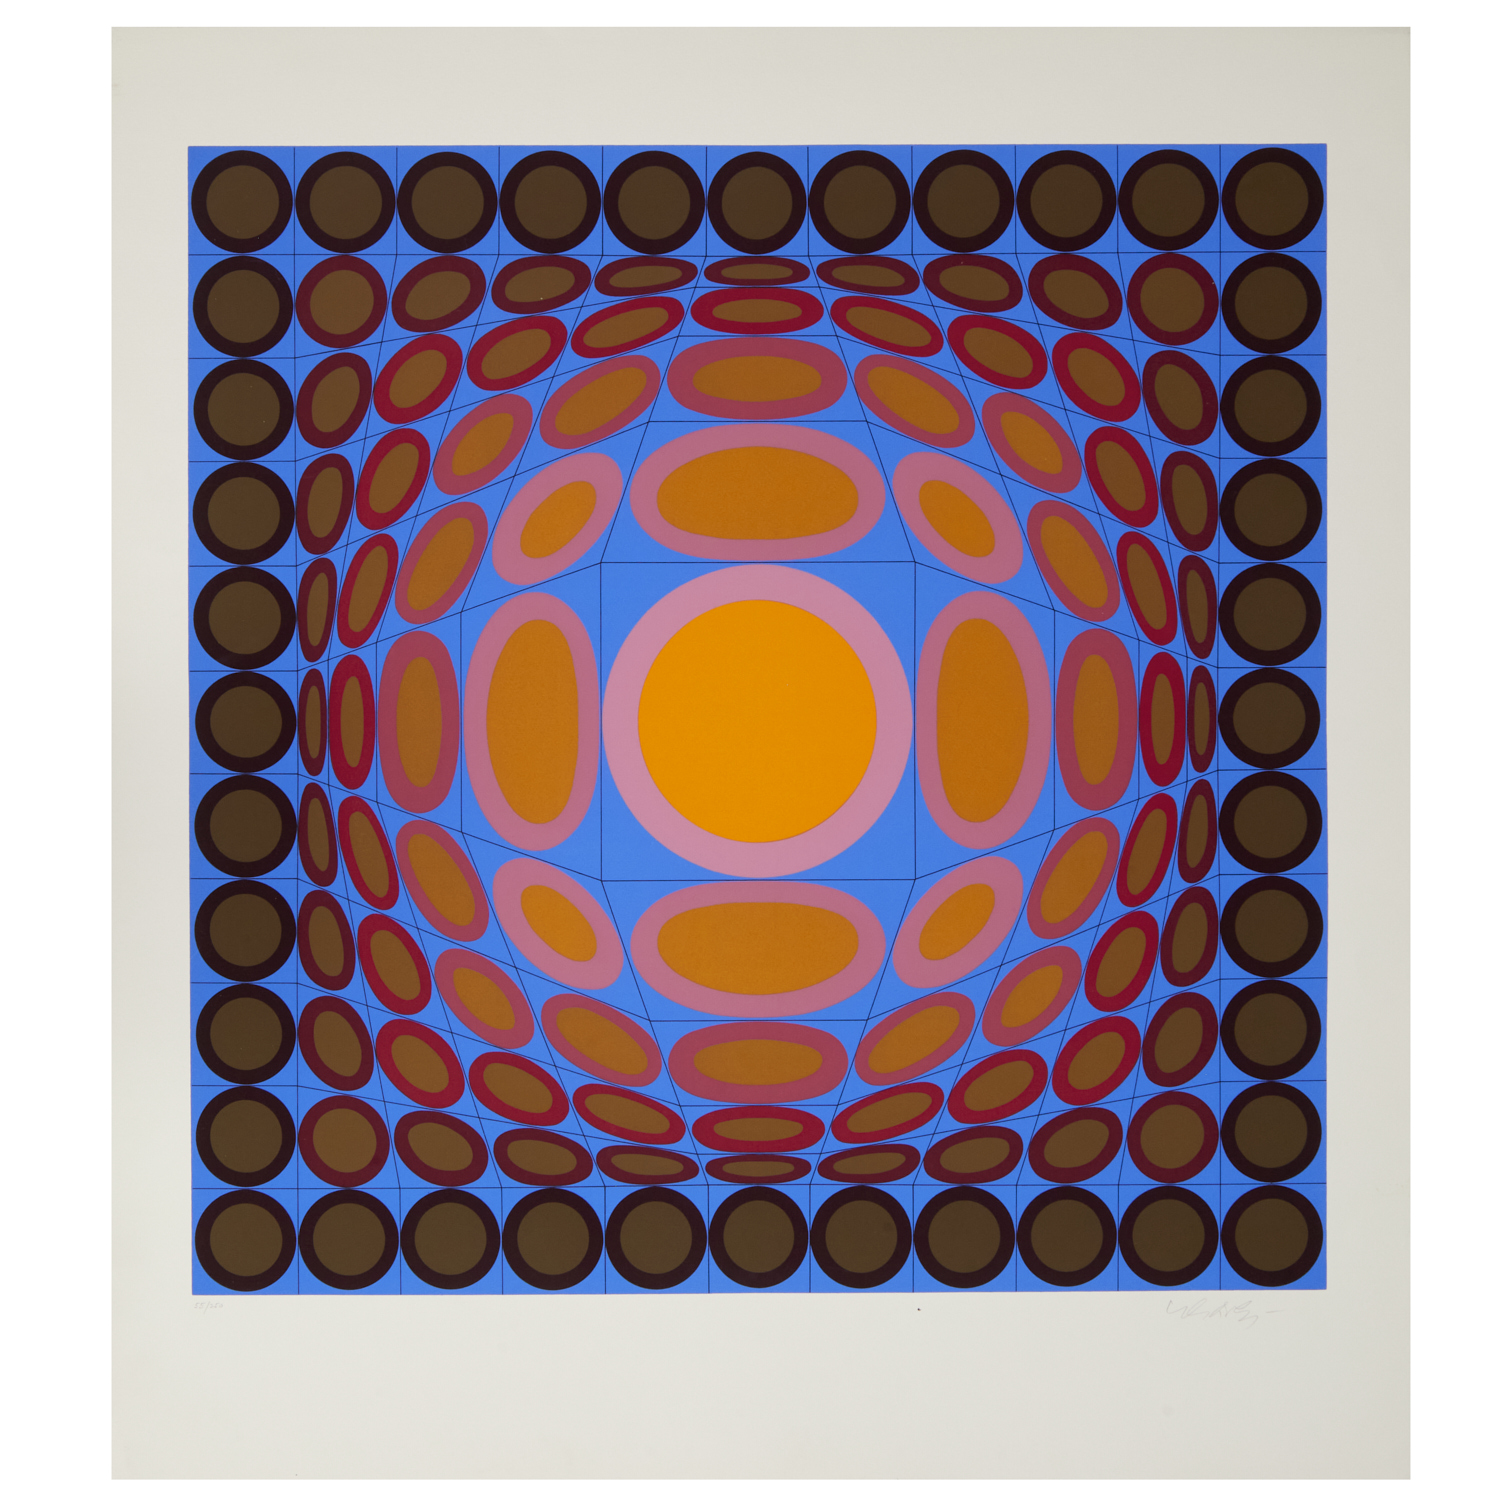 VICTOR VASARELY, SIGNED SERIGRAPH